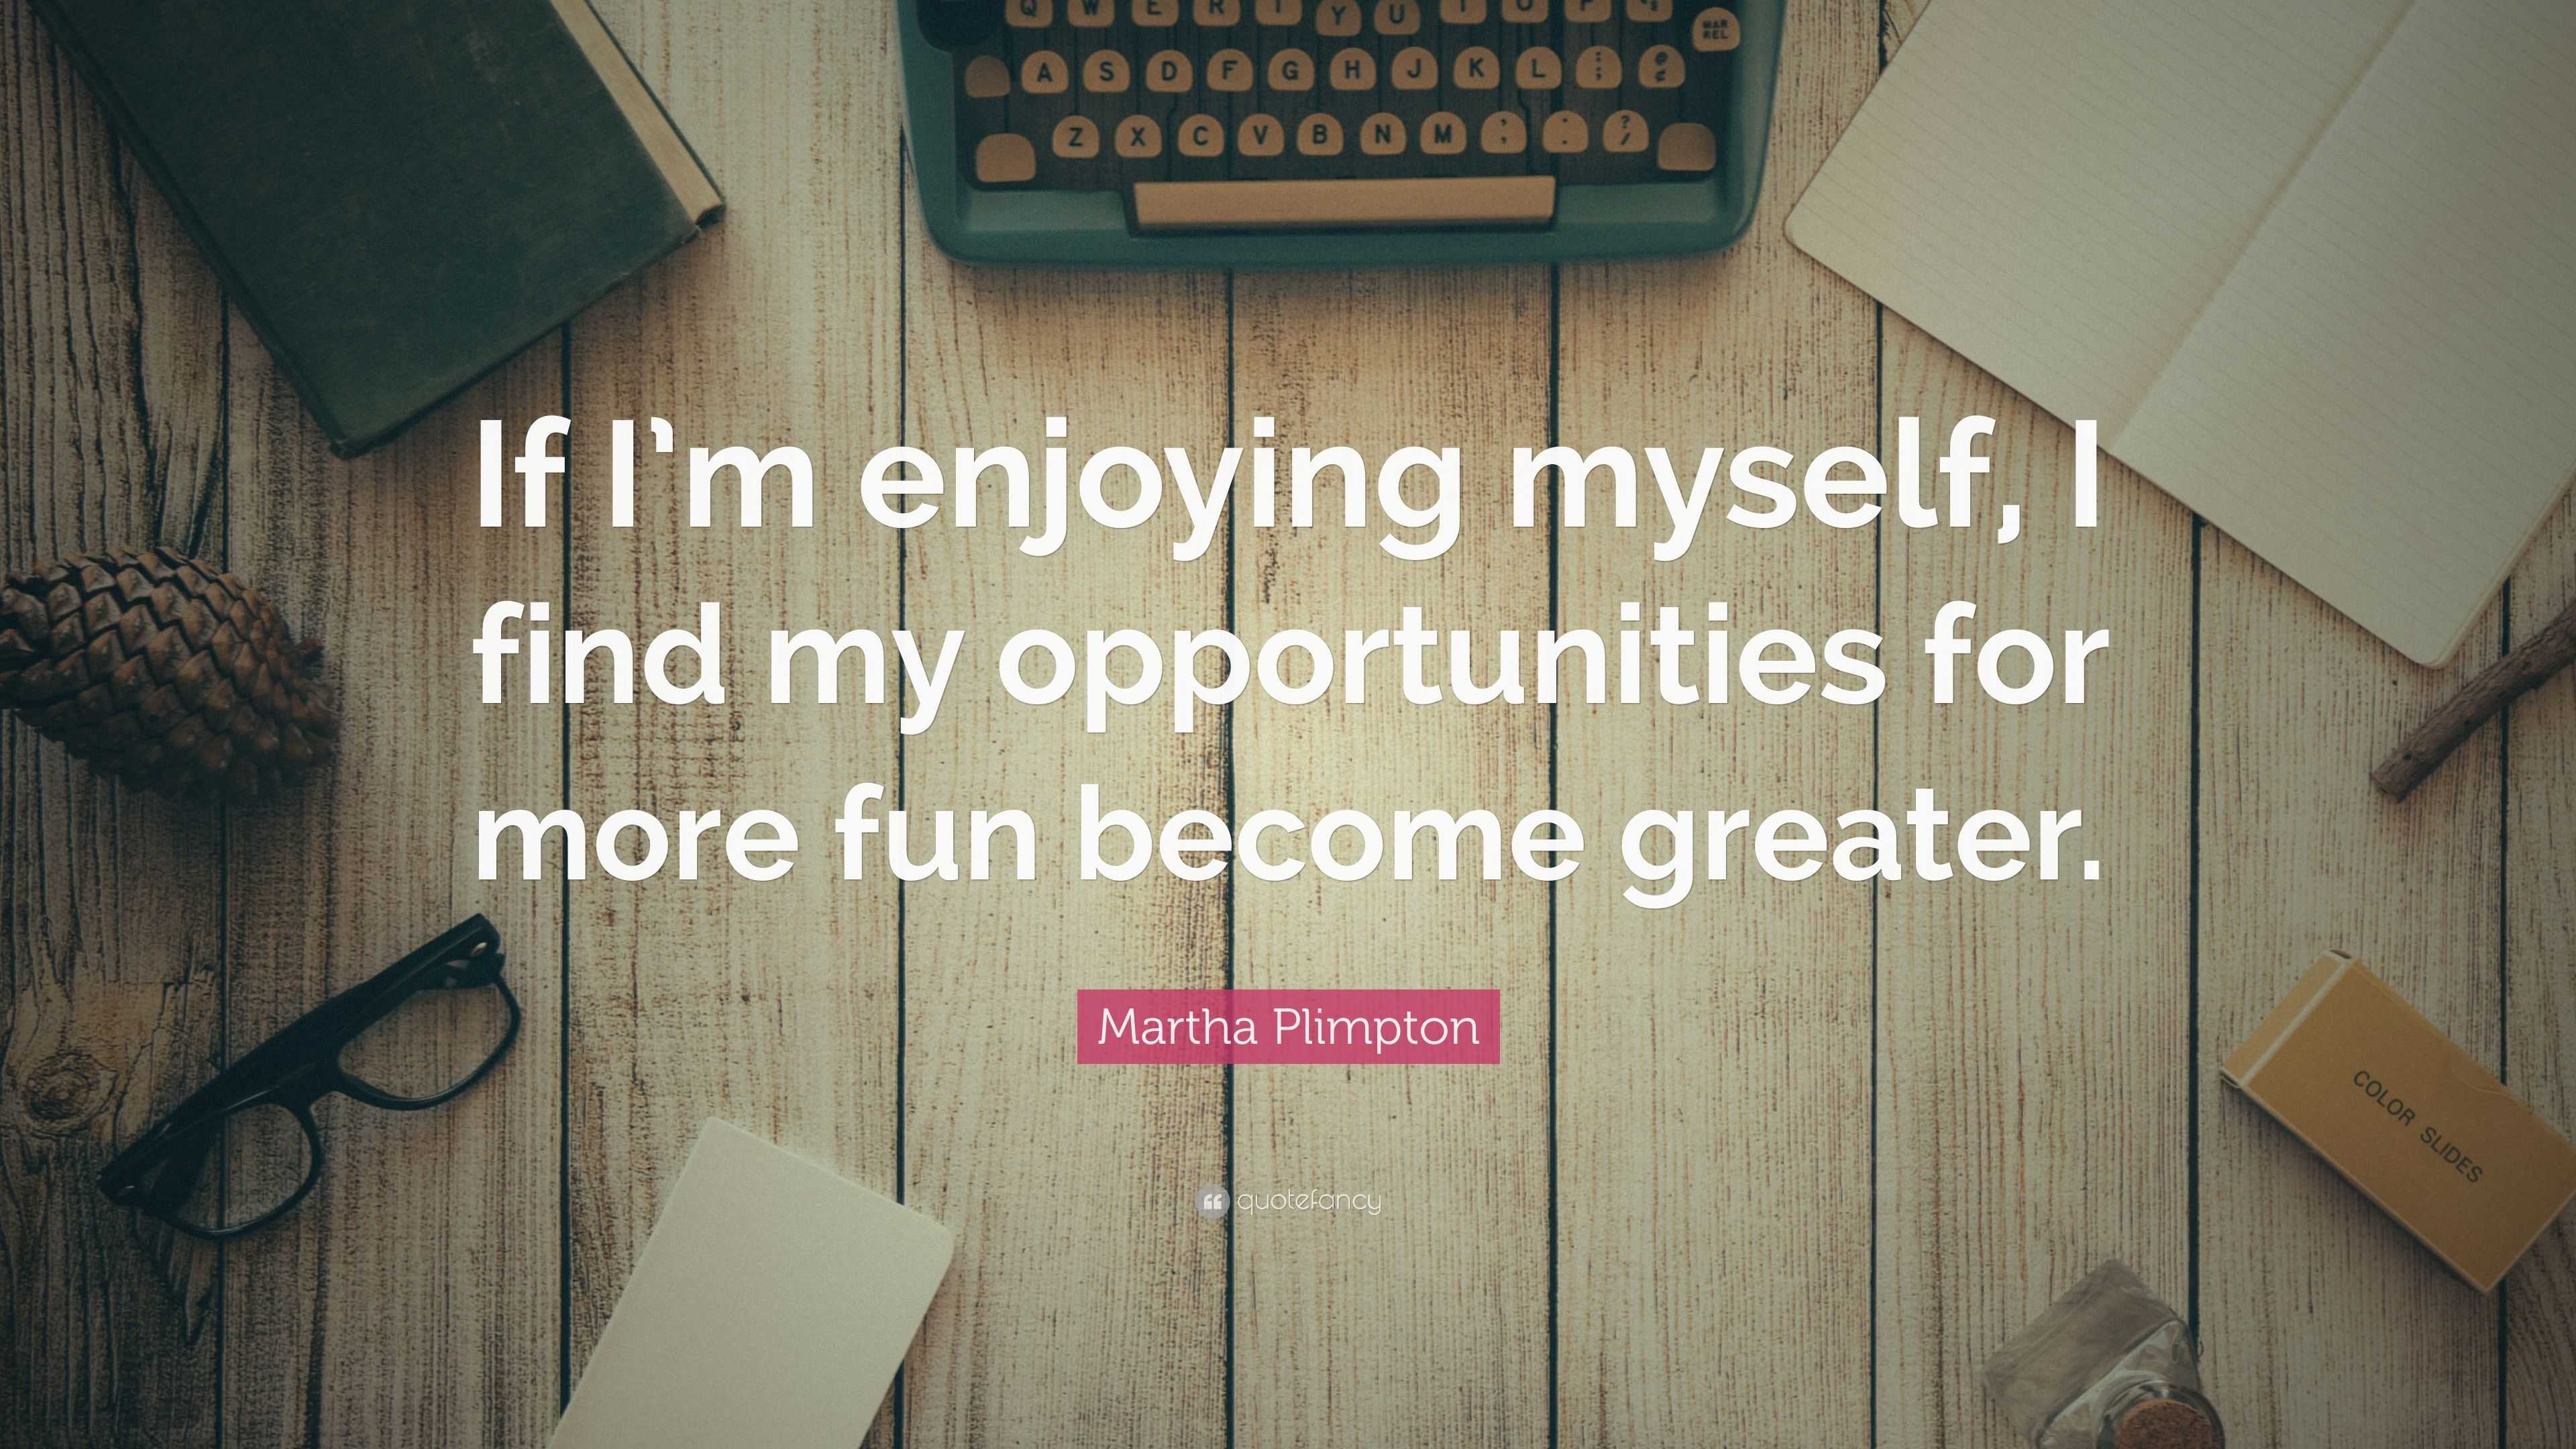 If I'm enjoying myself, I find my opportunities for more fun